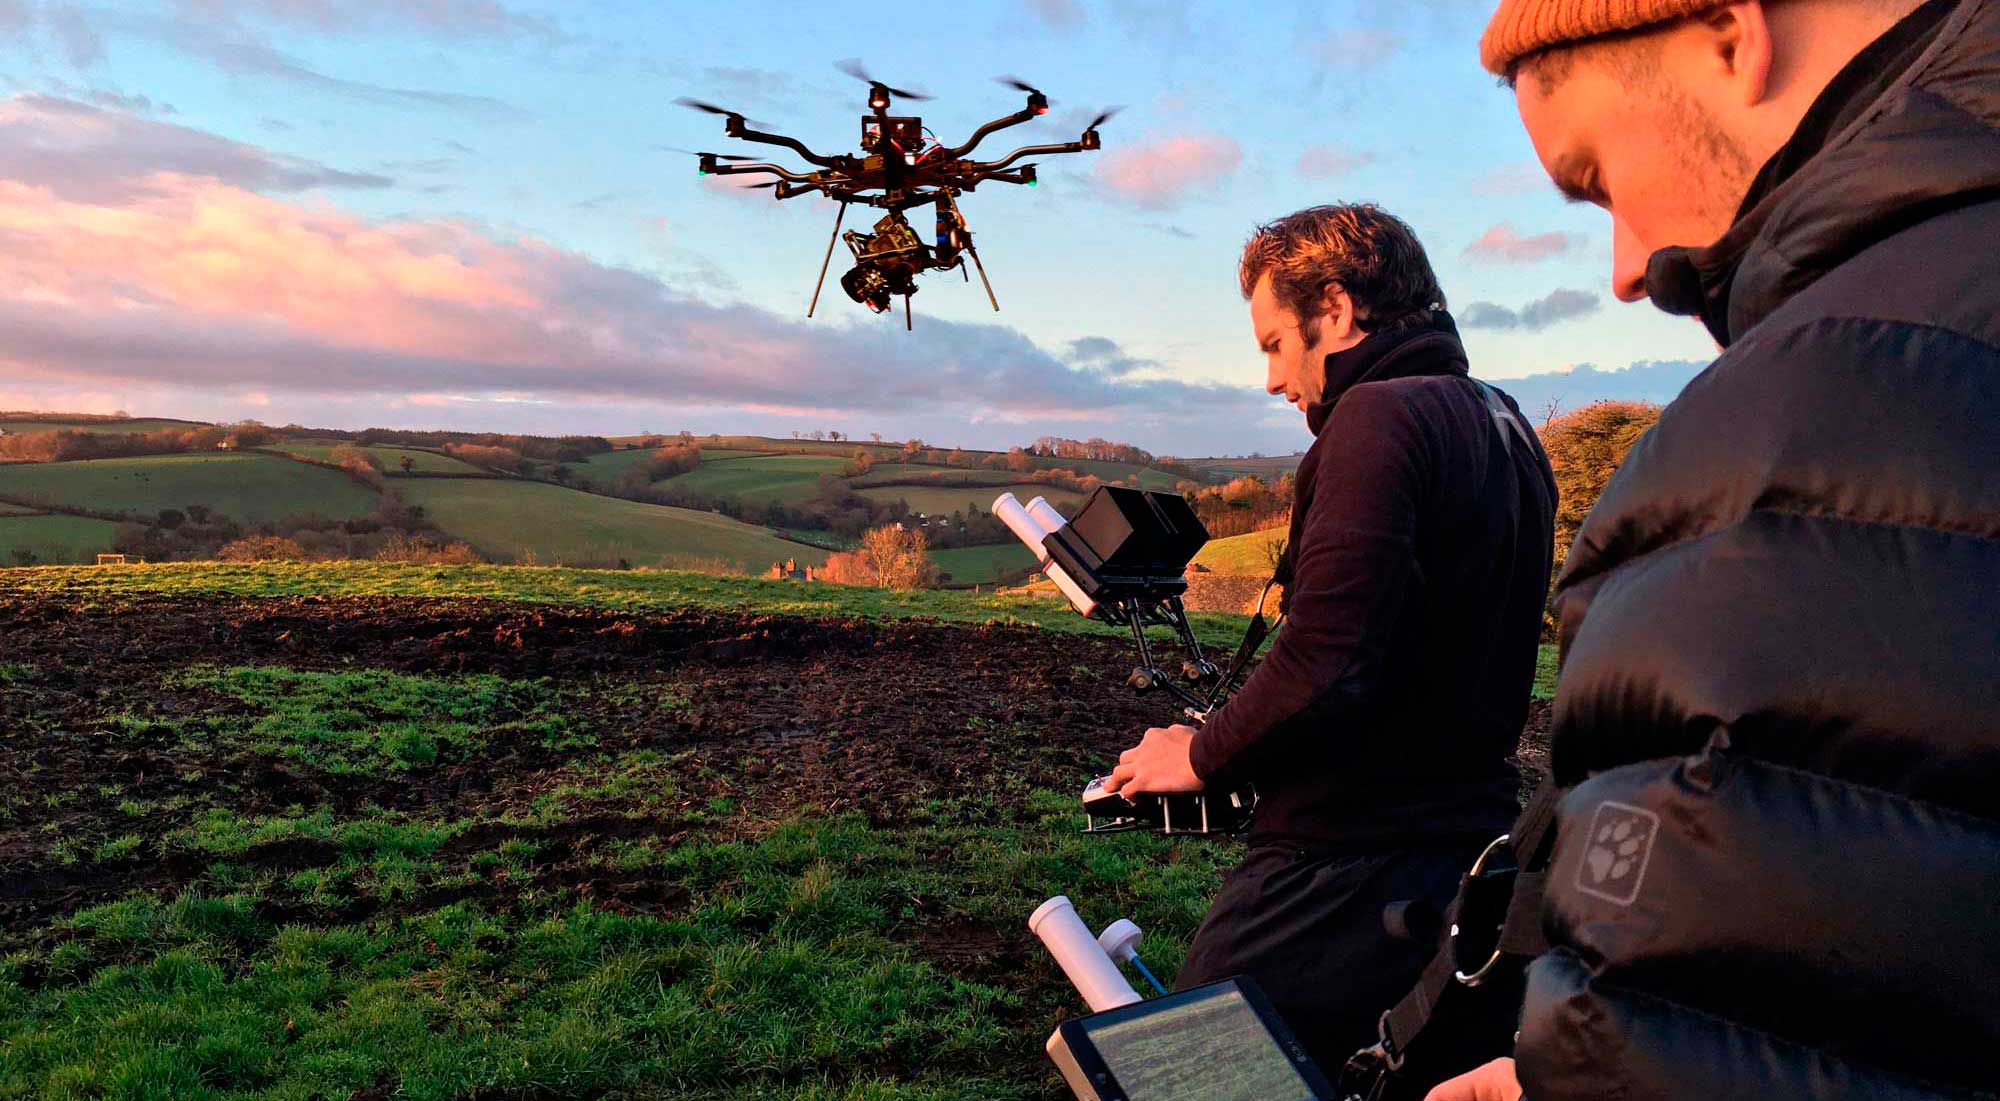 Drone-aerial-filming-photography-agriculture-arri-alexa-mini-movi-pro-uk-crop-2000px